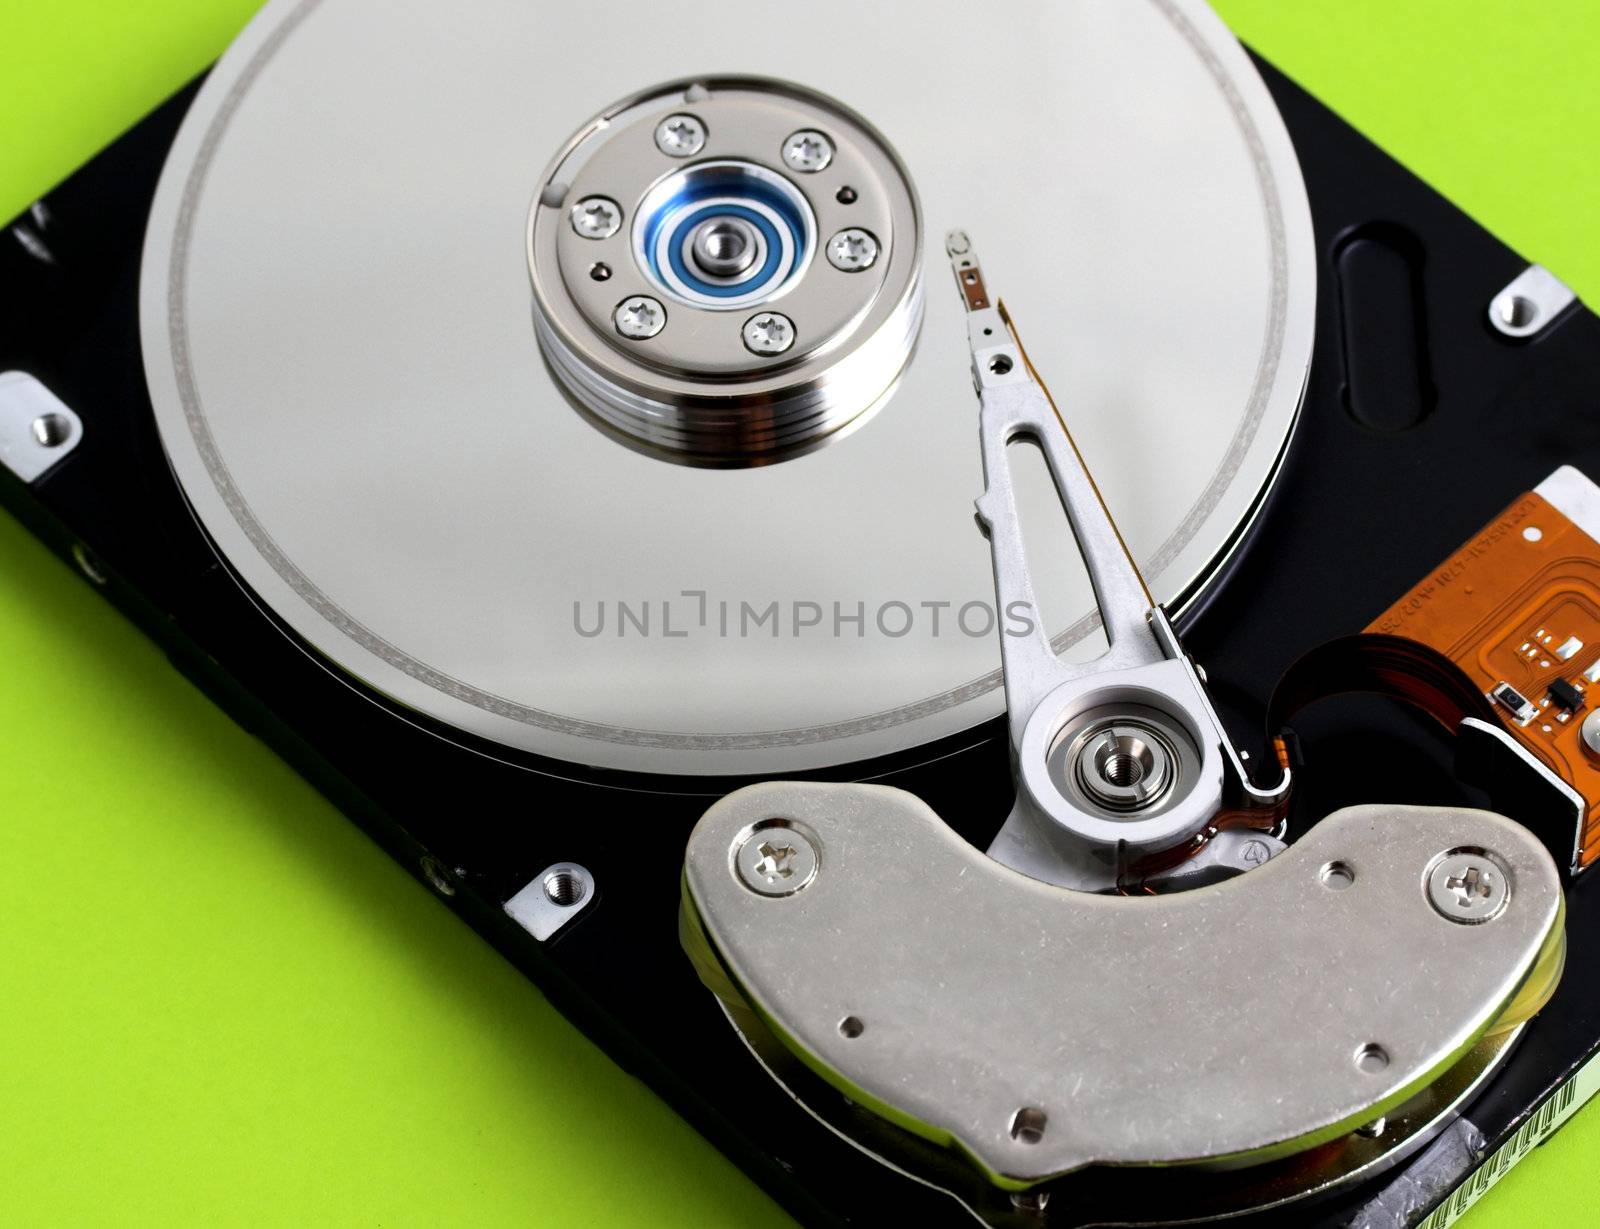 Open hard disk drive in a green background